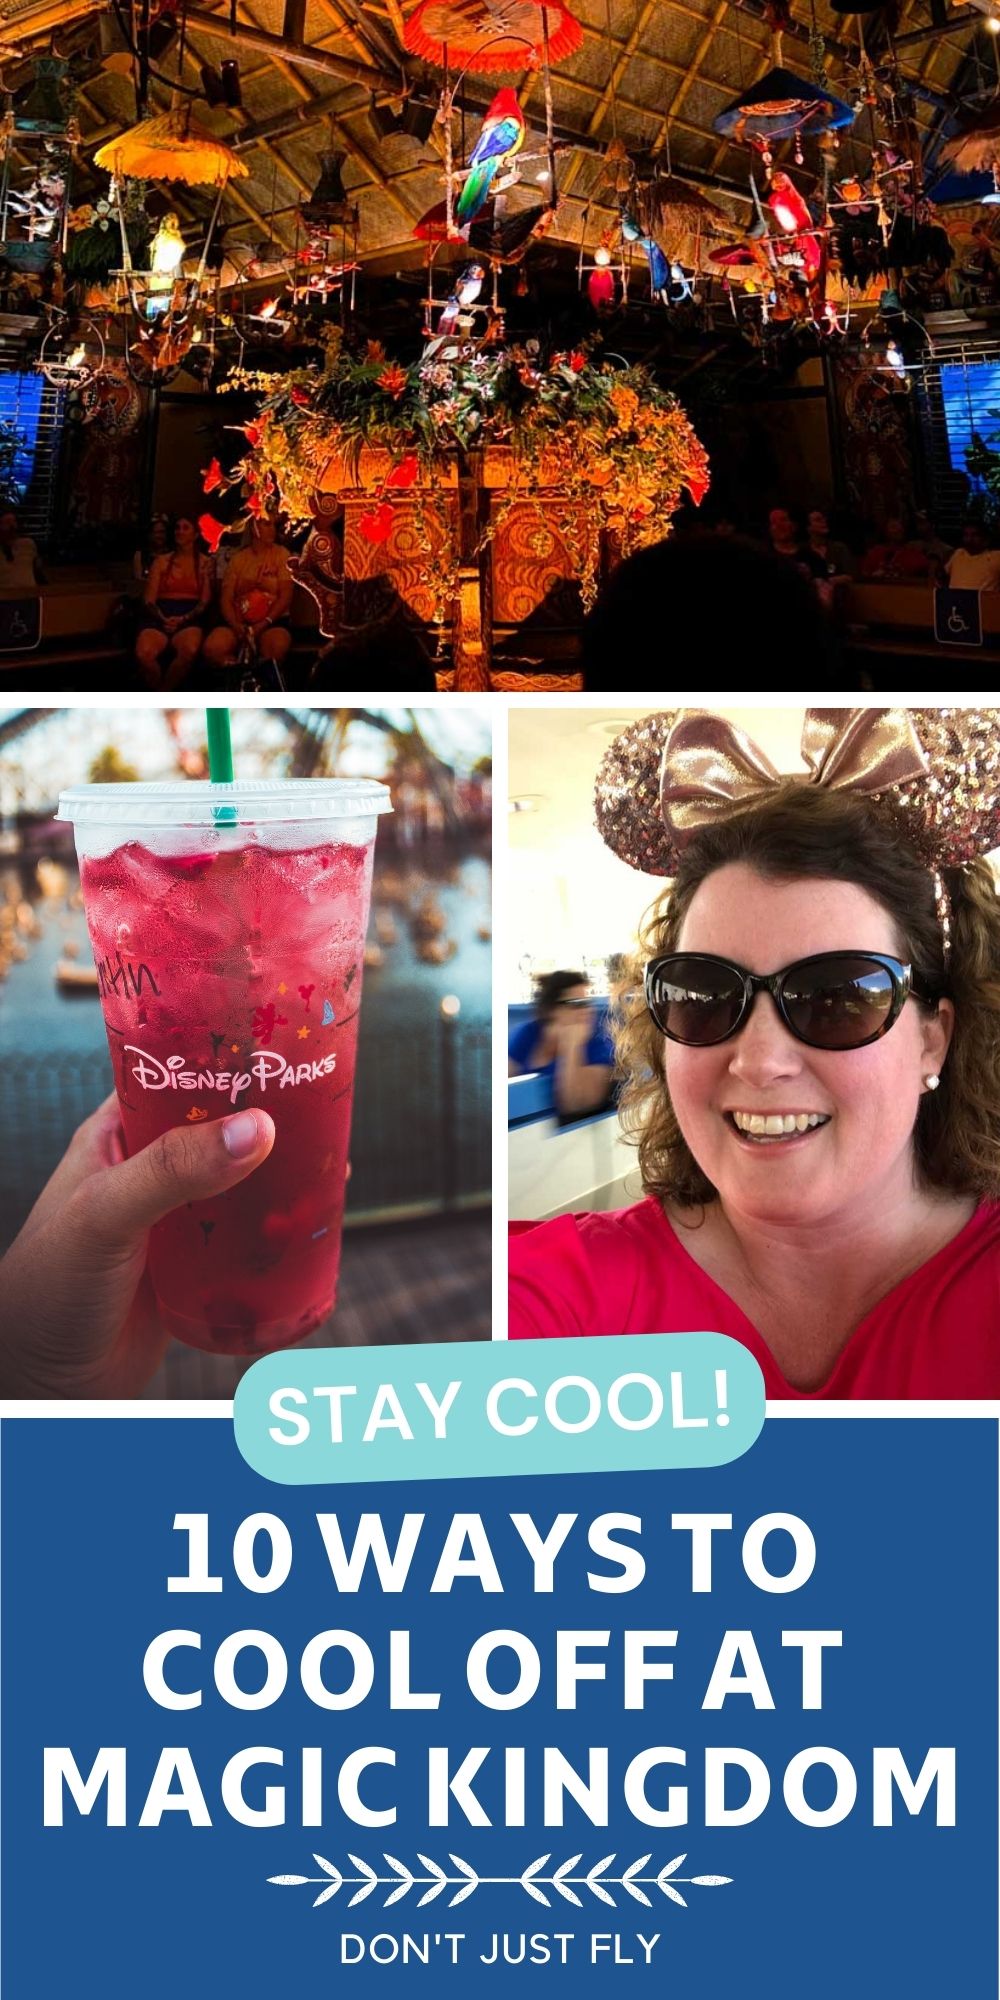 A photo collage shows 3 of the ways to stay cool at Disney World.